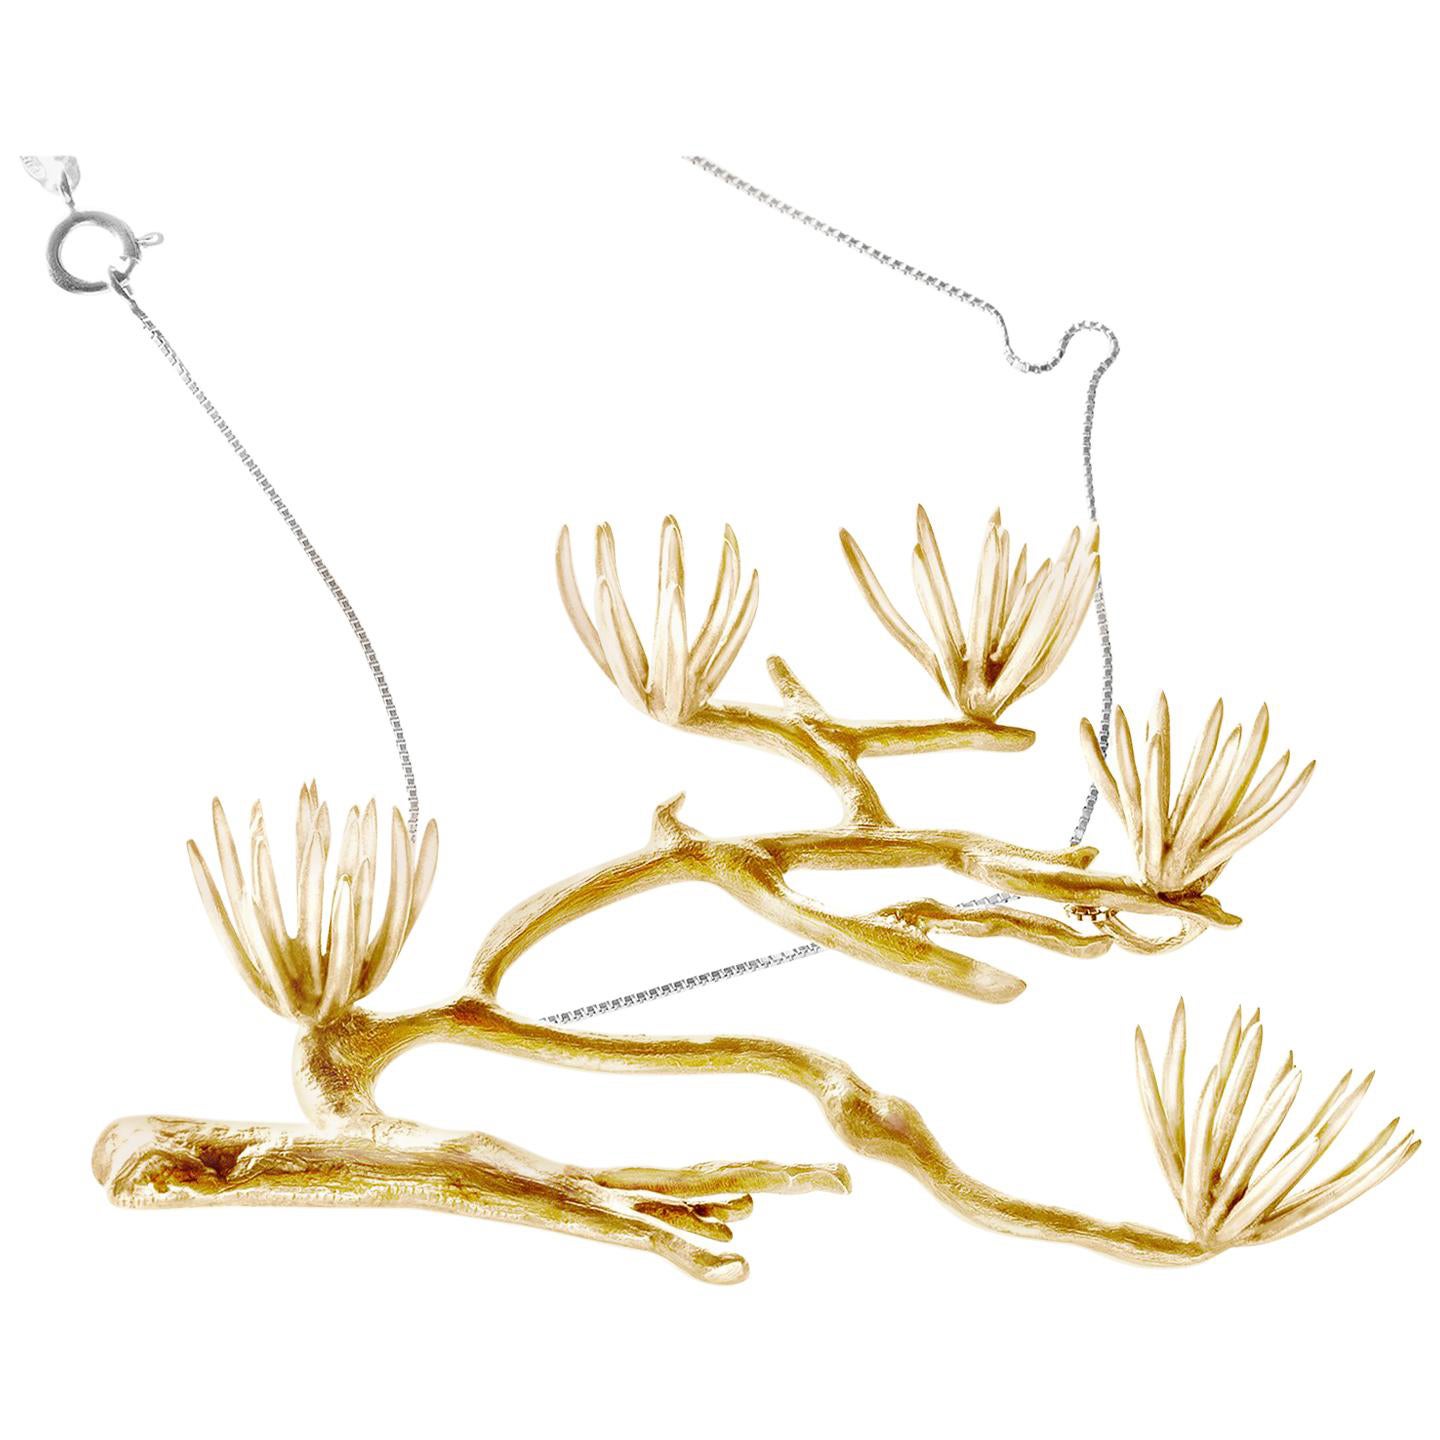 Featured in Vogue Yellow Gold Necklace Pine by the Artist